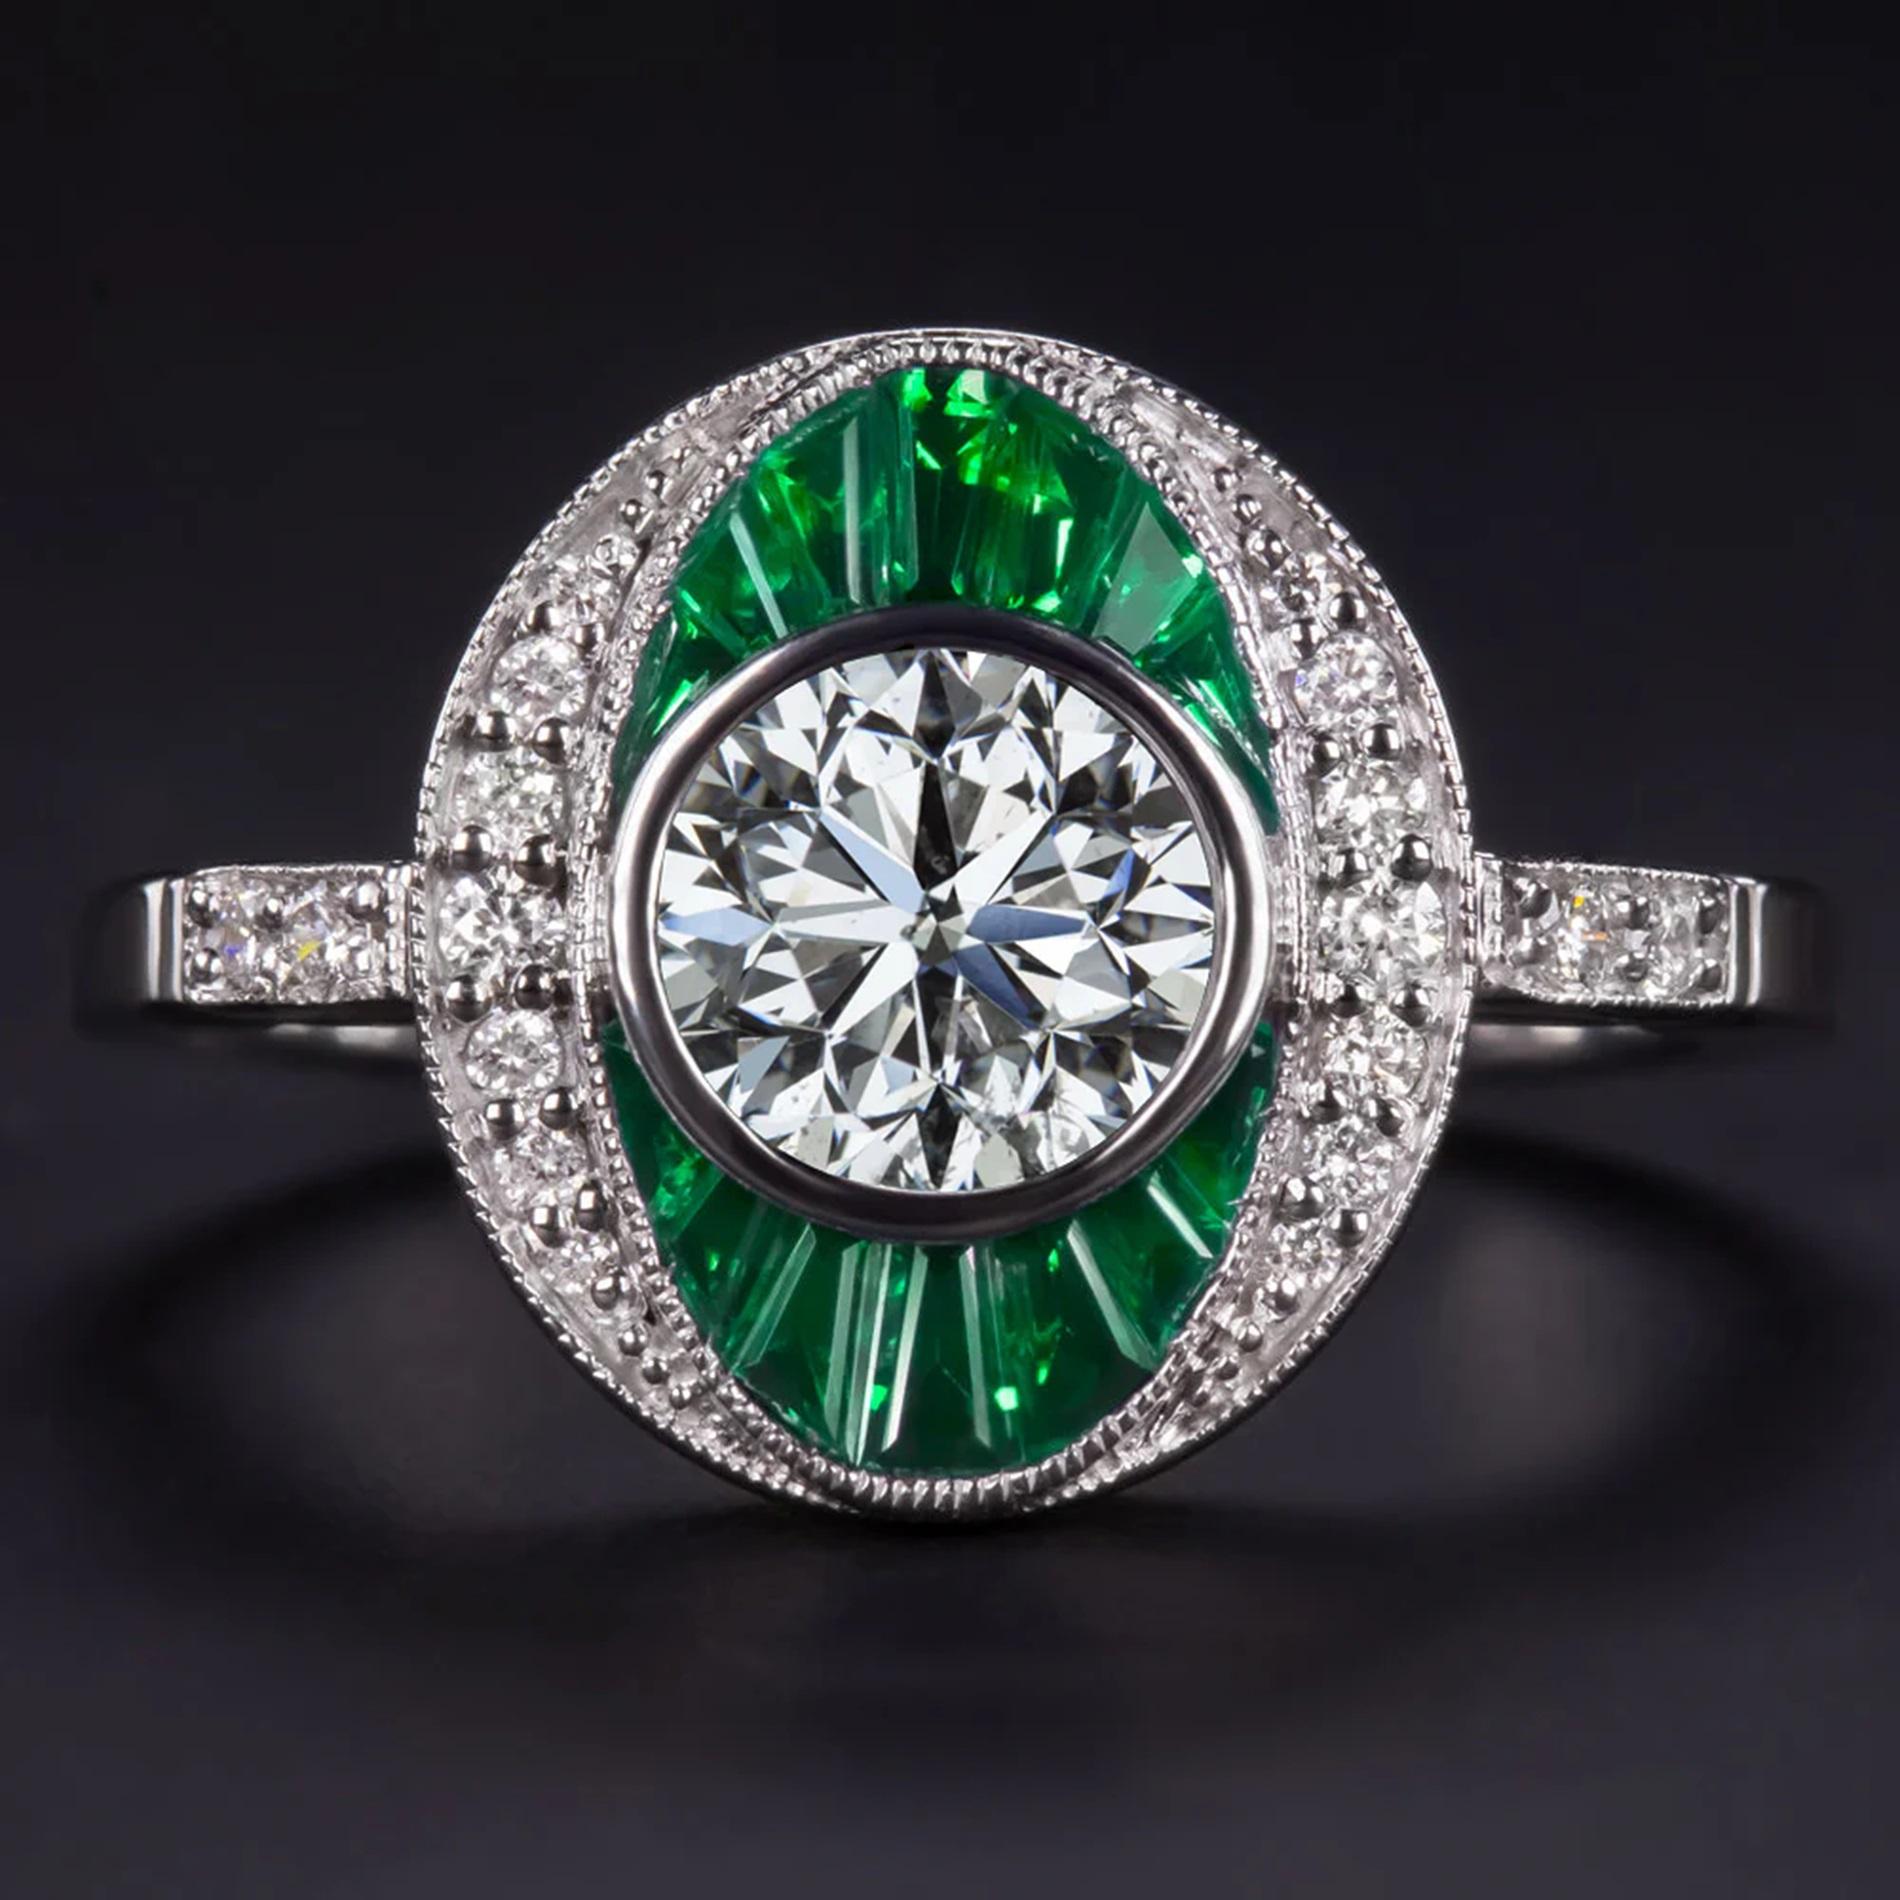 Discover timeless elegance with this stunning Art Deco-inspired diamond and emerald ring, offering rich color and exceptional sparkle! Featuring a high-quality round-cut diamond, the ring showcases a beautifully crafted oval design adorned with